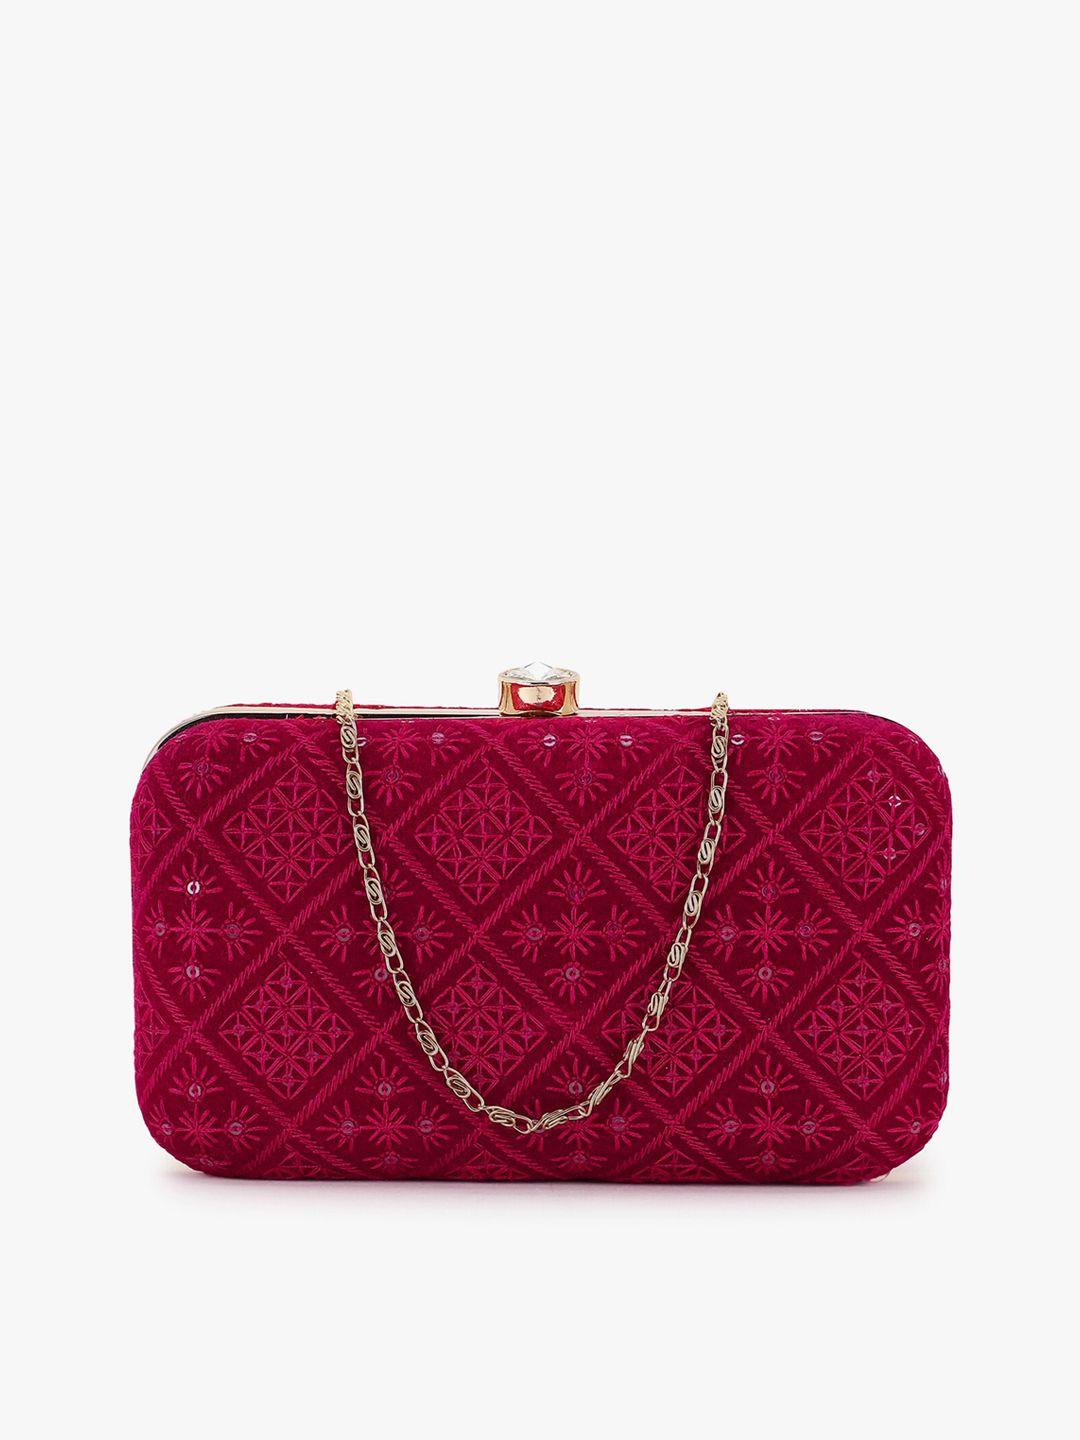 anekaant-magenta-&-gold-toned-embroidered-box-clutch